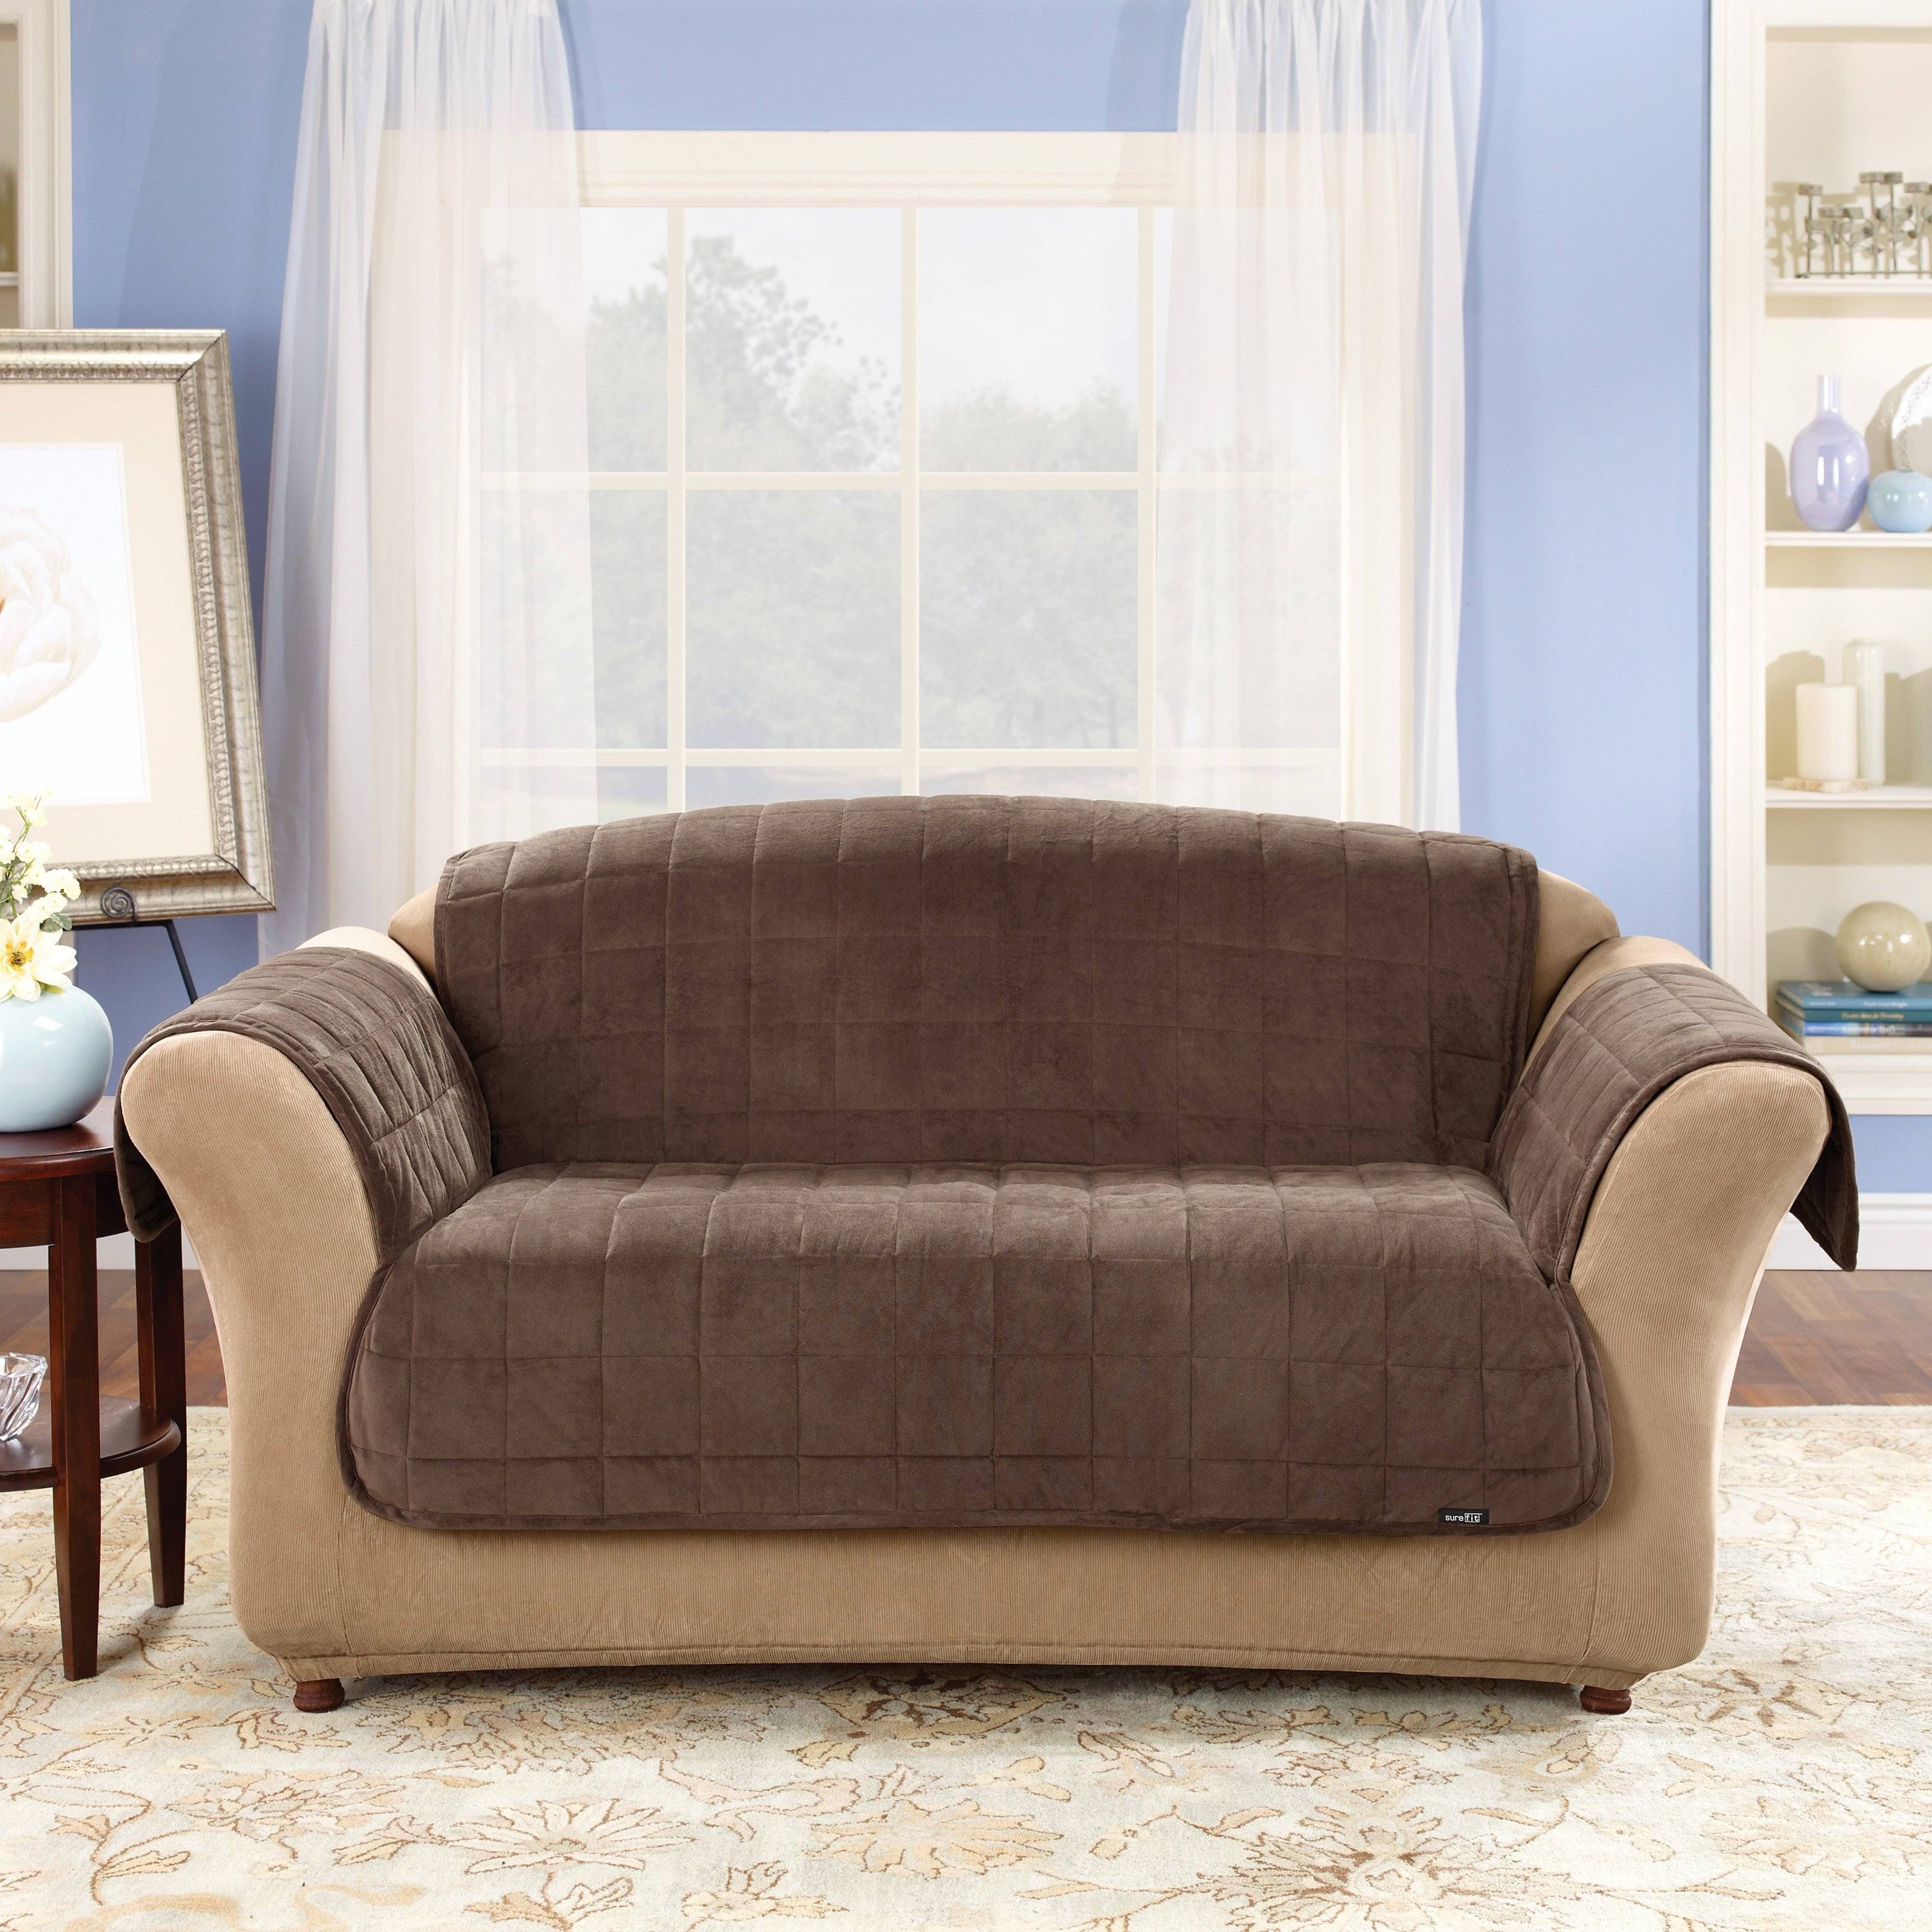 Furniture: Sofa Covers Walmart | Walmart Couch Covers | Slip With Covers For Sofas (View 6 of 30)